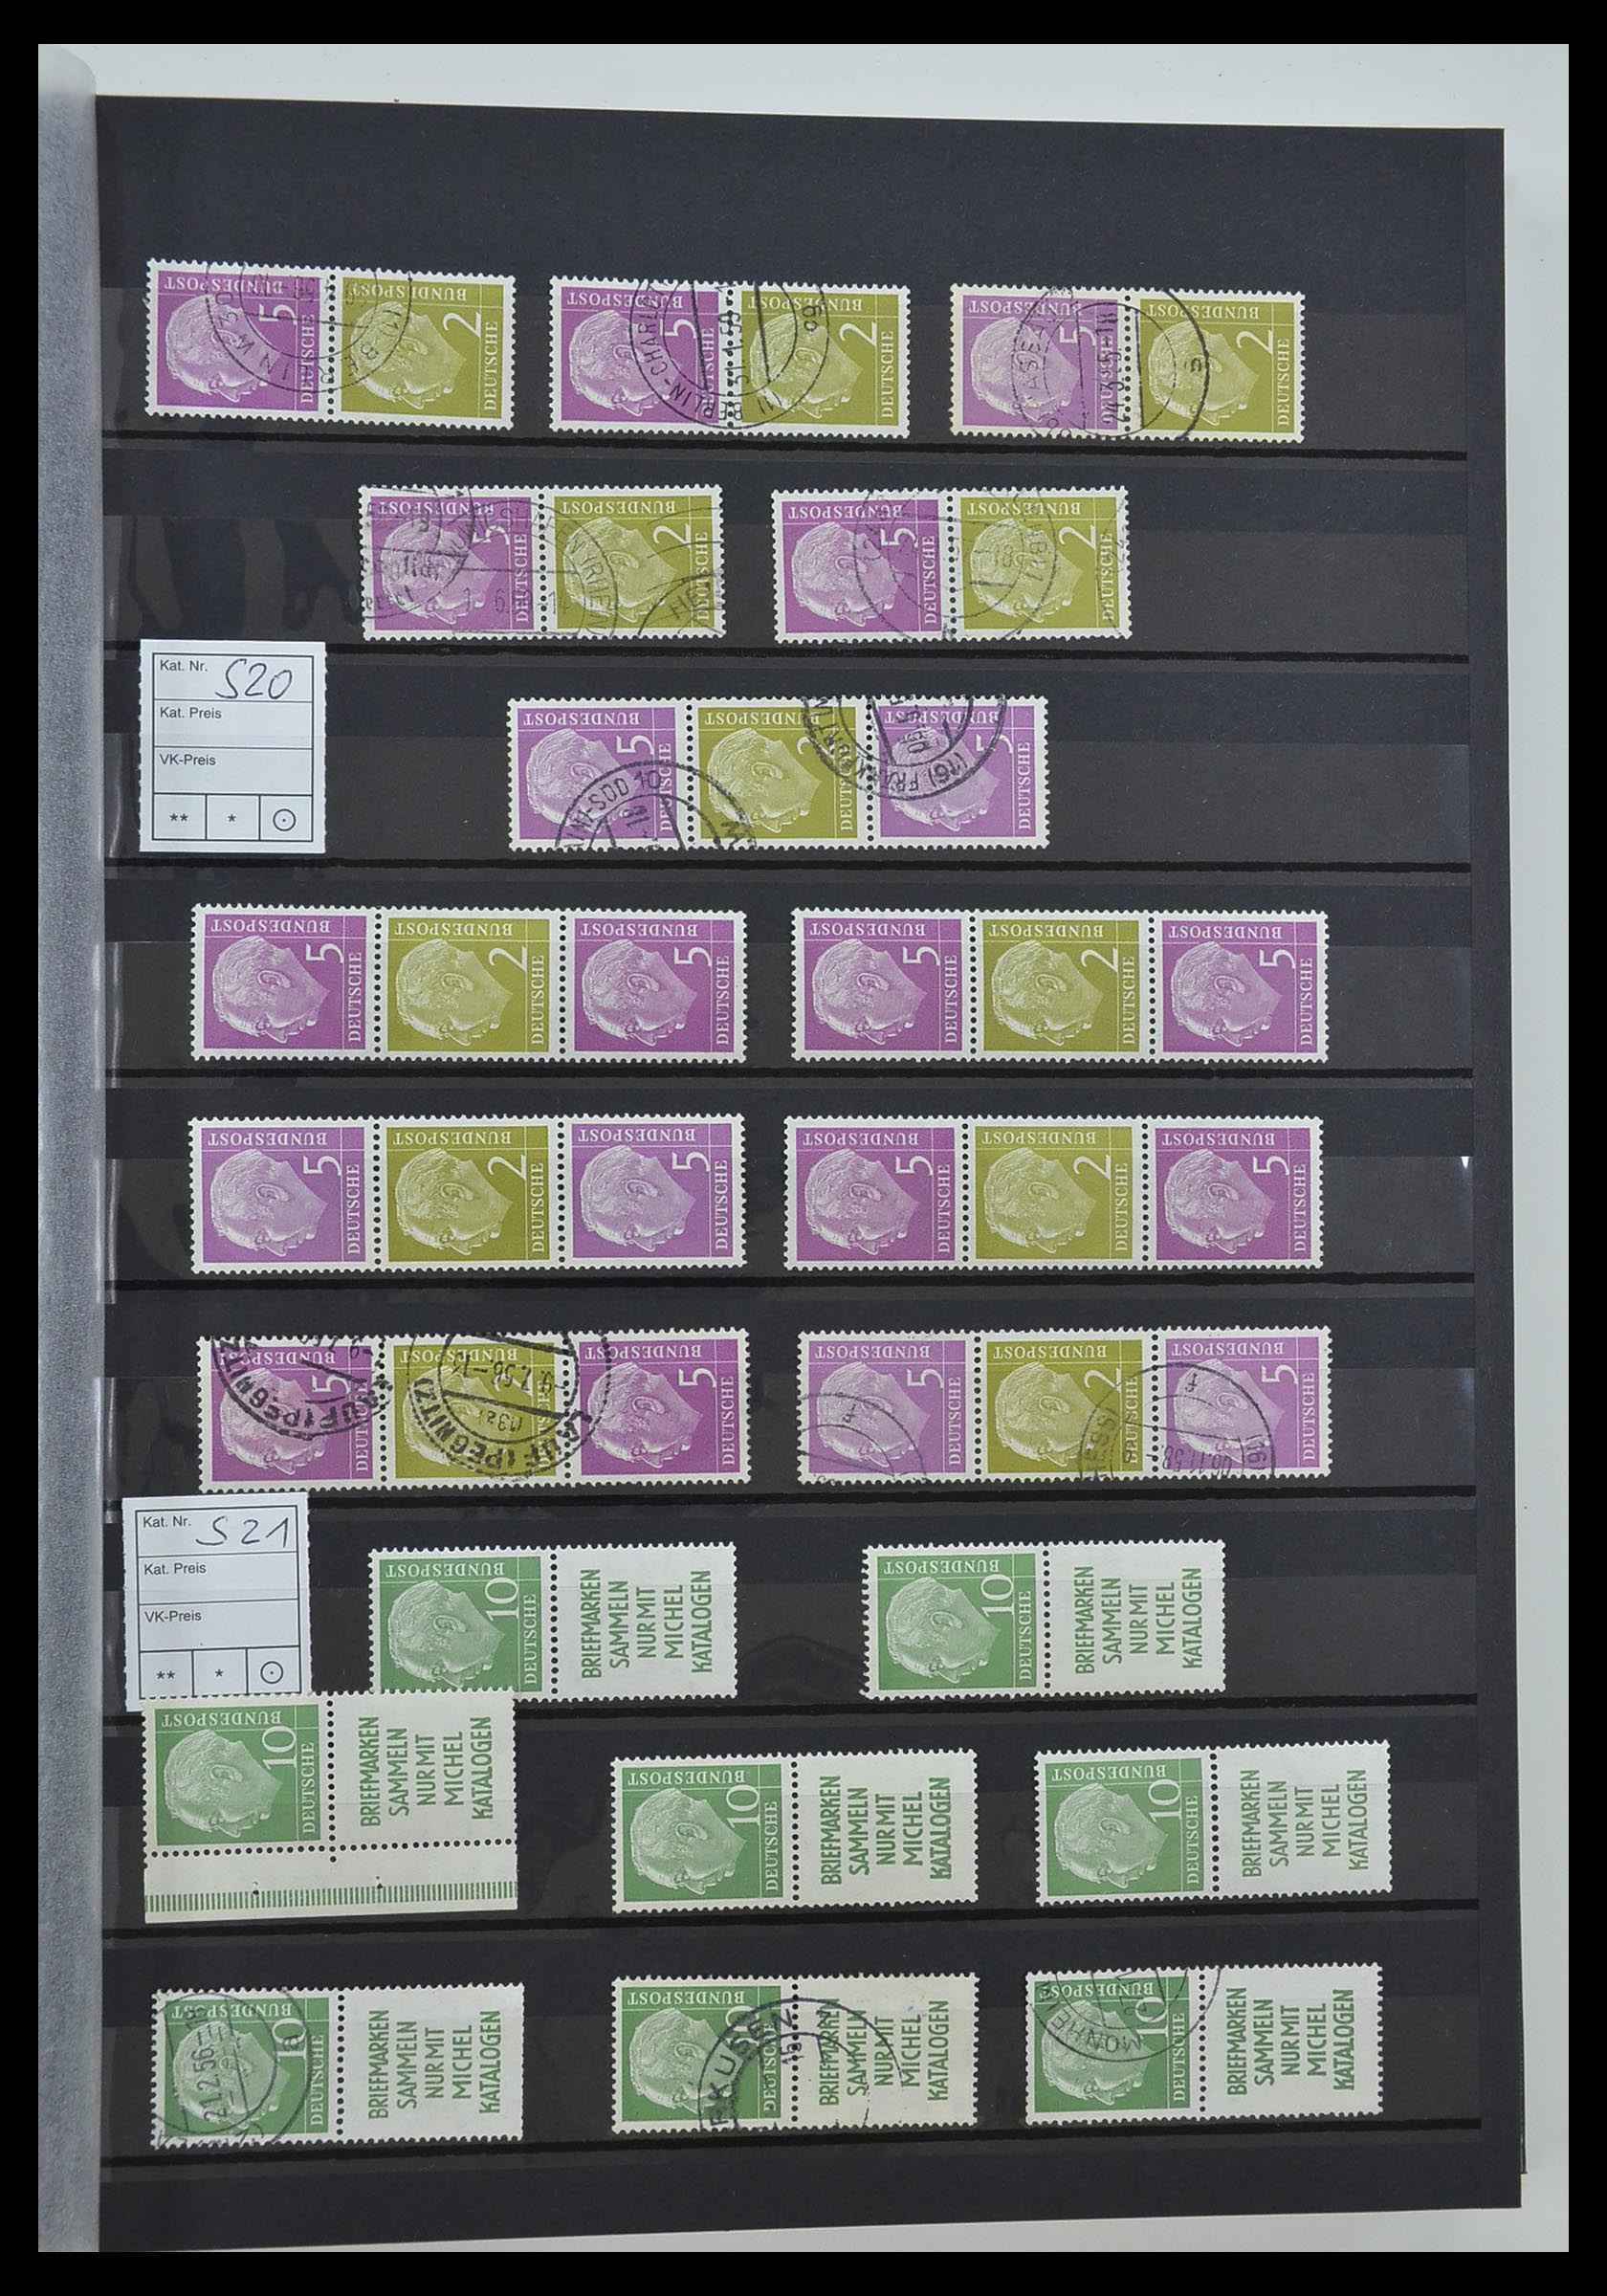 33275 009 - Stamp collection 33275 Bundespost combinations 1951-1960.